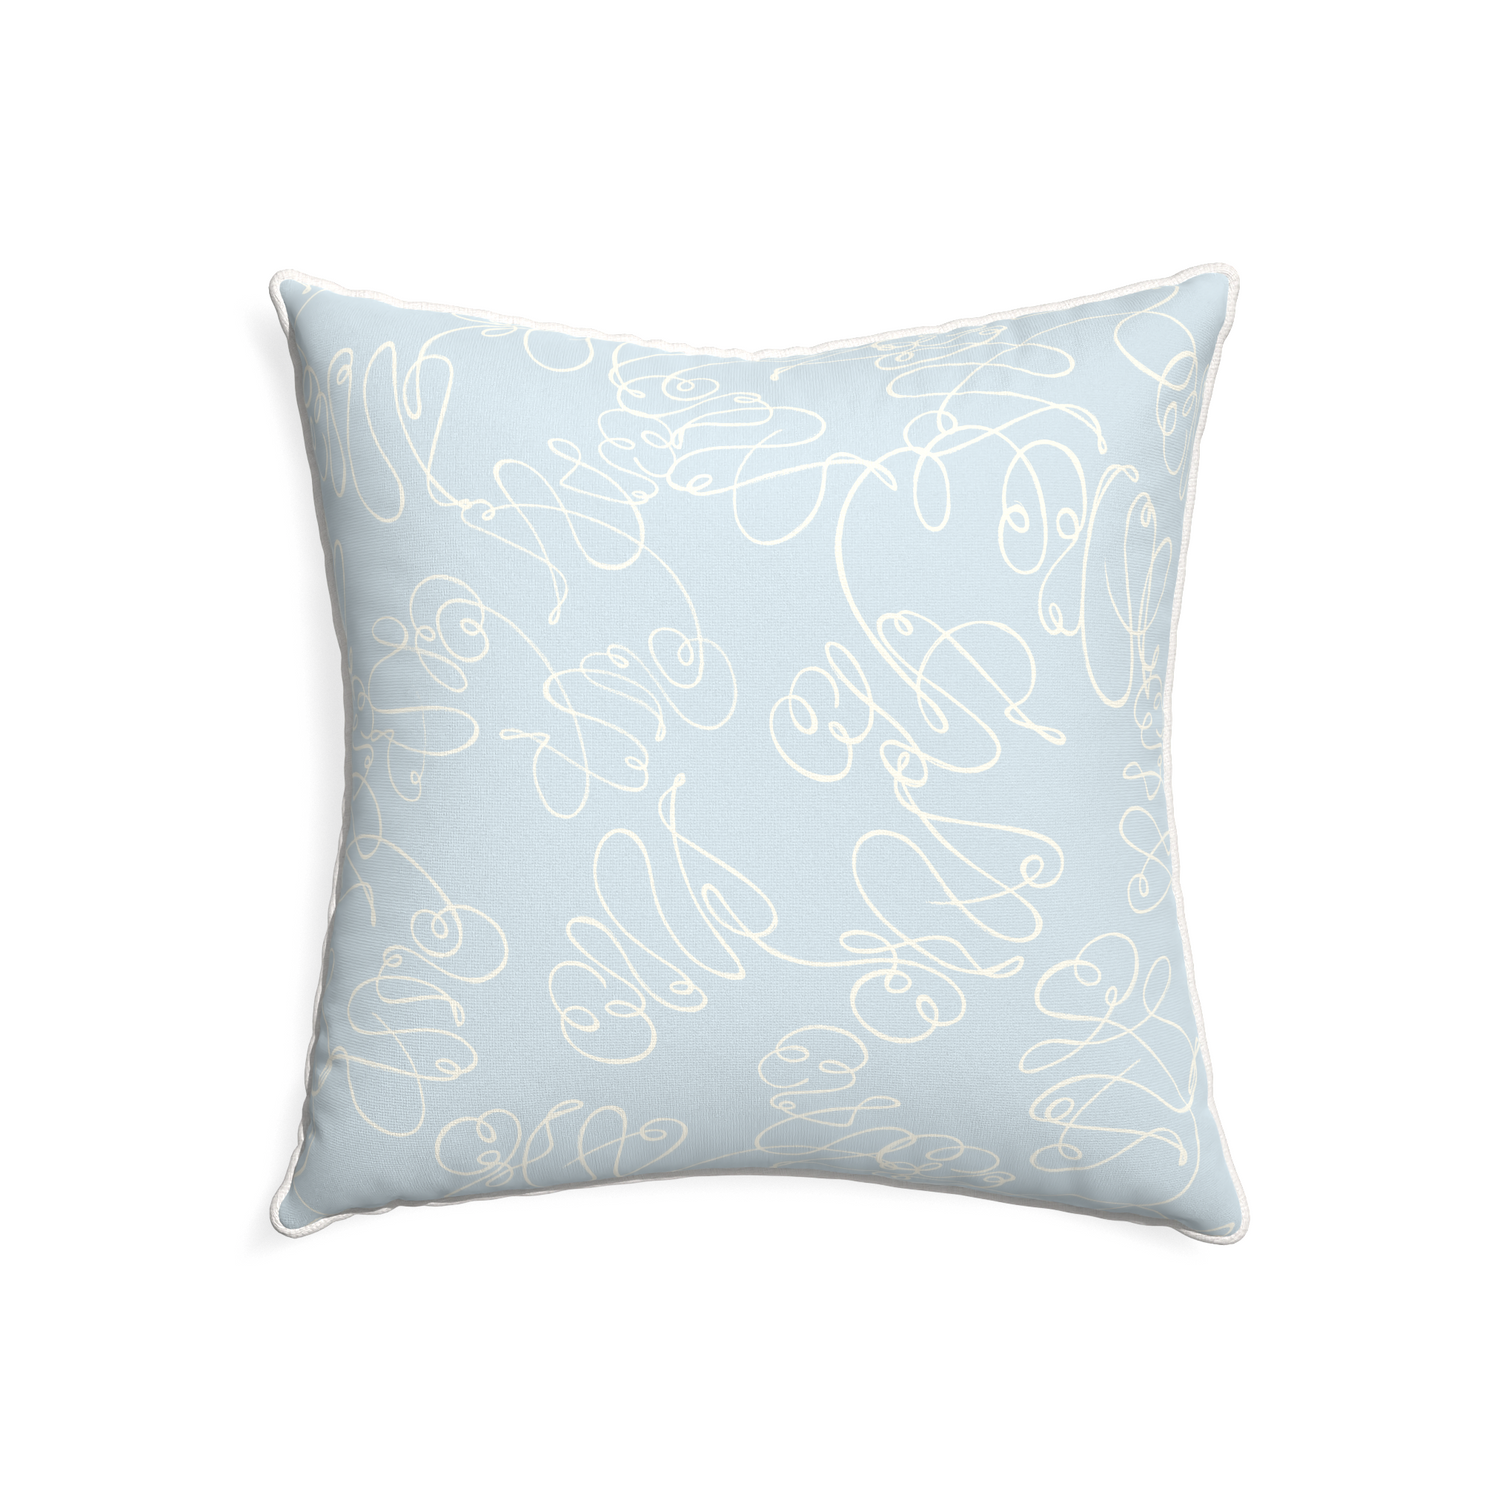 22-square mirabella custom powder blue abstractpillow with snow piping on white background